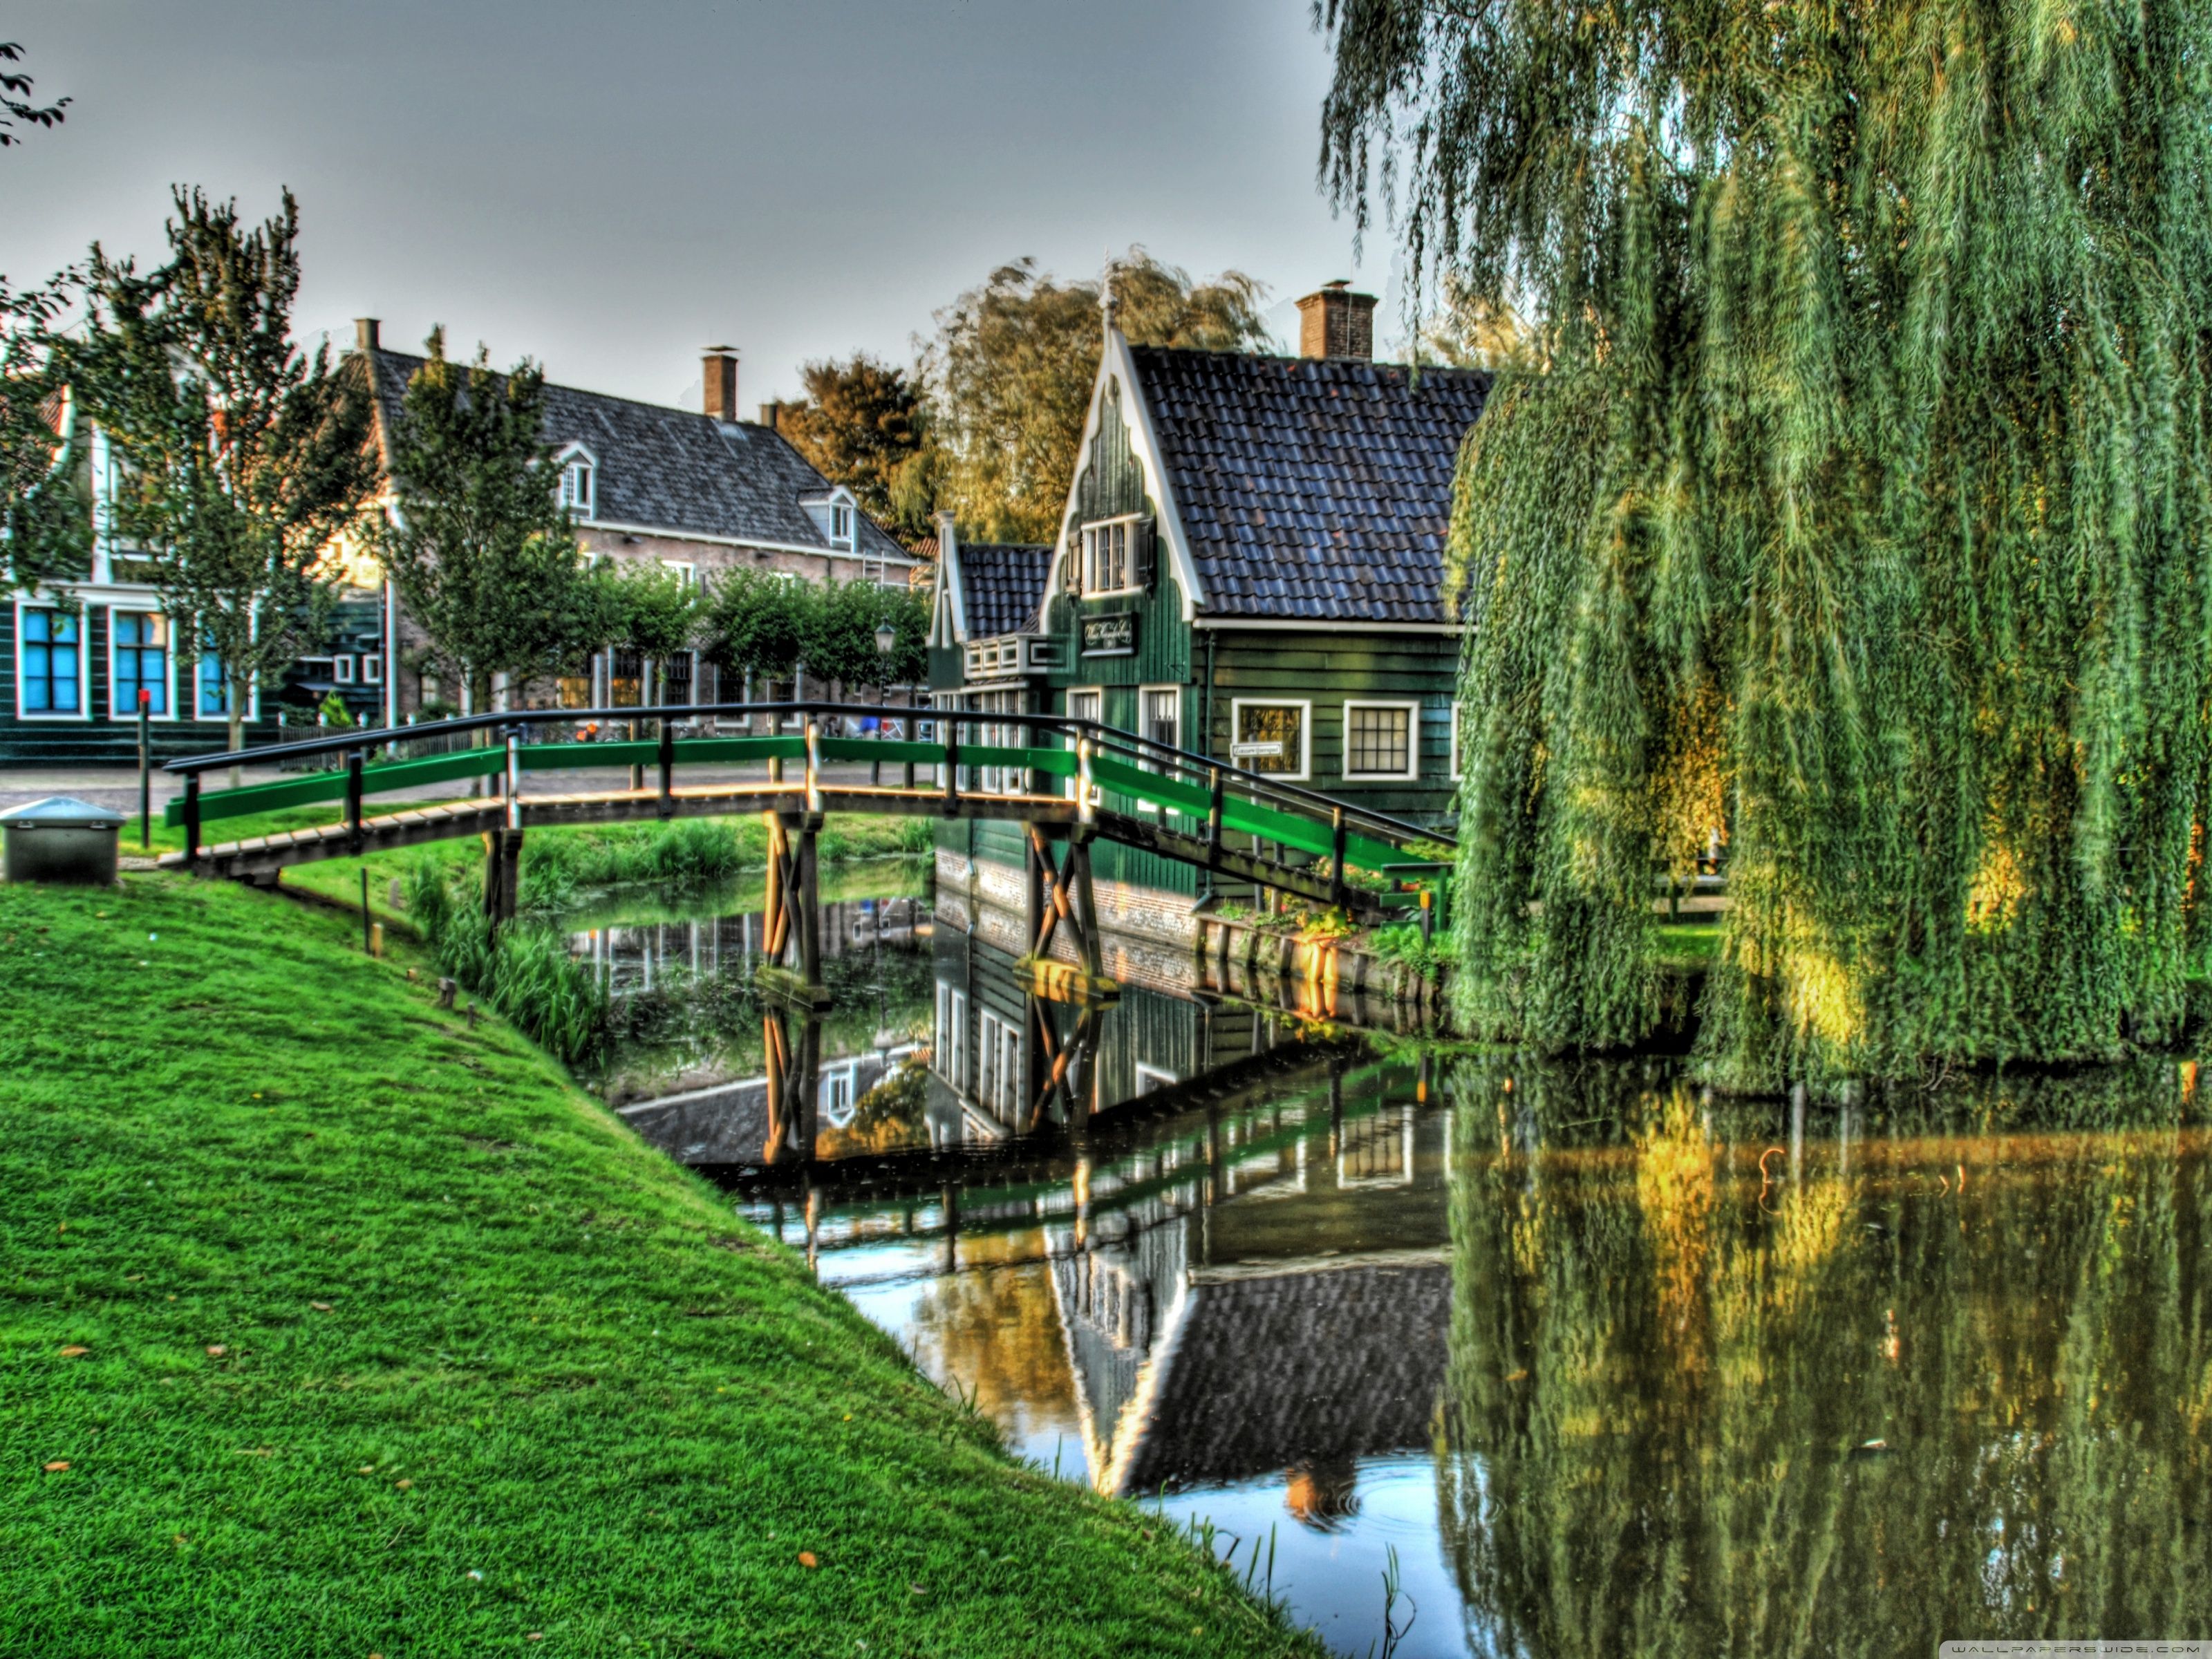 The bridge in Holland wallpaper and image, picture, photo